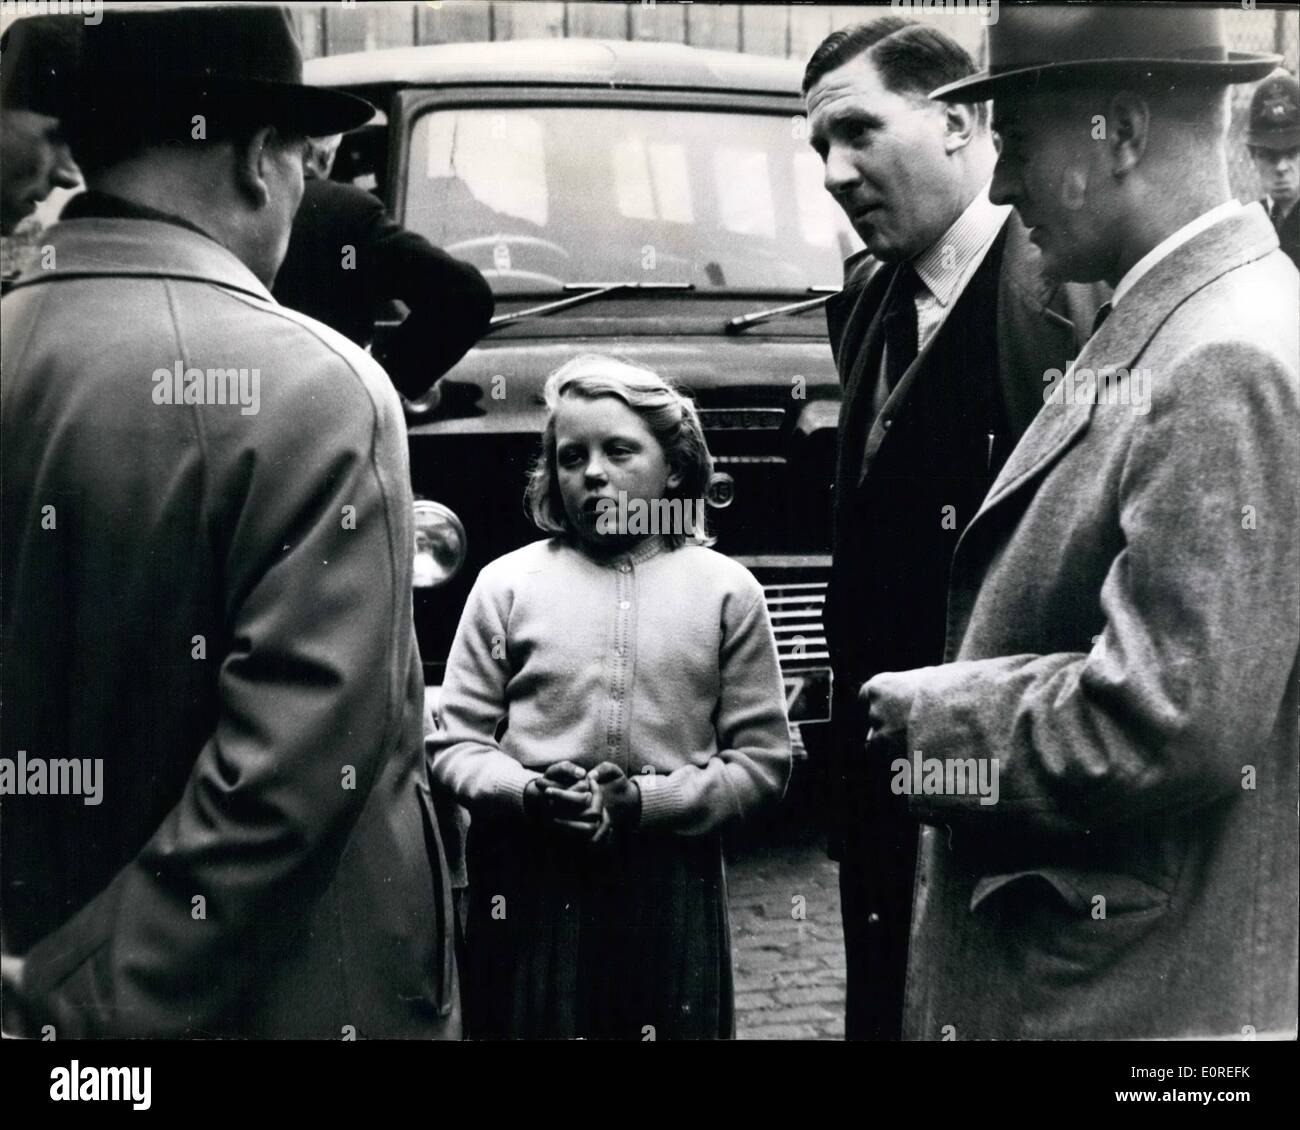 Apr. 04, 1959 - Ten-Year-old Christine sees ,000 mail bag Robbery - and tells detectives all about it: Ten-years-old Christine firm stone was skipping her way home down a narrow, cobbled back street in Marylebone yesterday when she saw five masked men ambush a post office mail van. She saw the bandits drag out the driver and his mate, and then escape in a car with three bags full of registered packets containing ,000. Then fair-haired Christine told detectives all about it Stock Photo